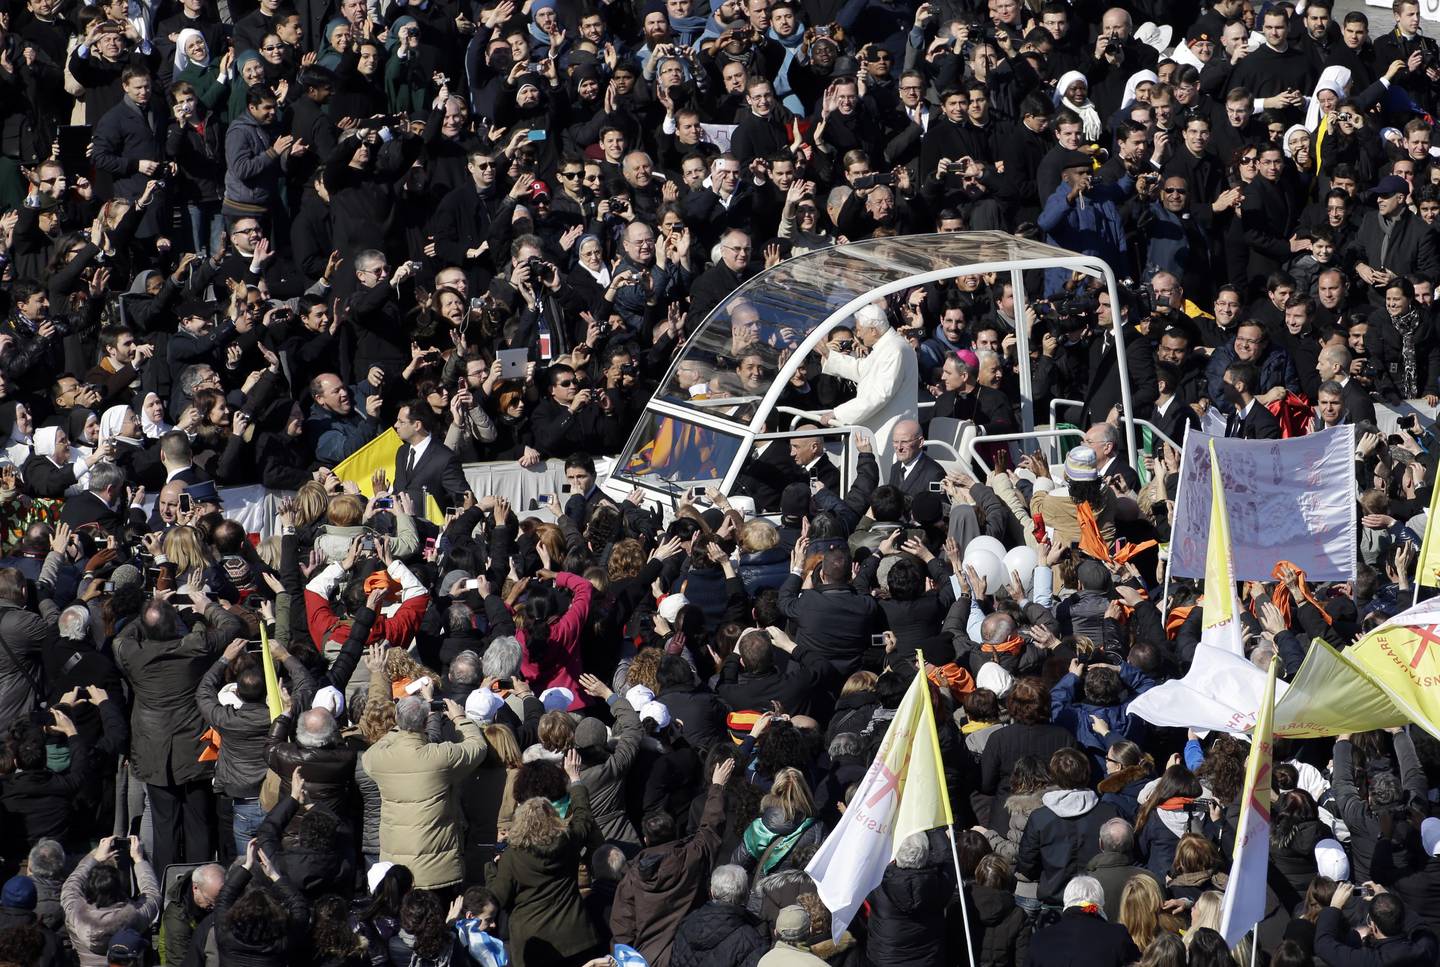 Pope Benedict XVI is driven through the crowd in his pope-mobile as he arrives to celebrate his last general audience in St. Peter's Square, at the Vatican, Wednesday, Feb. 27, 2013. Benedict XVI basked in an emotional sendoff Wednesday at his final general audience in St. Peter's Square, recalling moments of "joy and light" during his papacy but also times of great difficulty. He also thanked his flock for respecting his decision to retire. (AP Photo/Andrew Medichini)